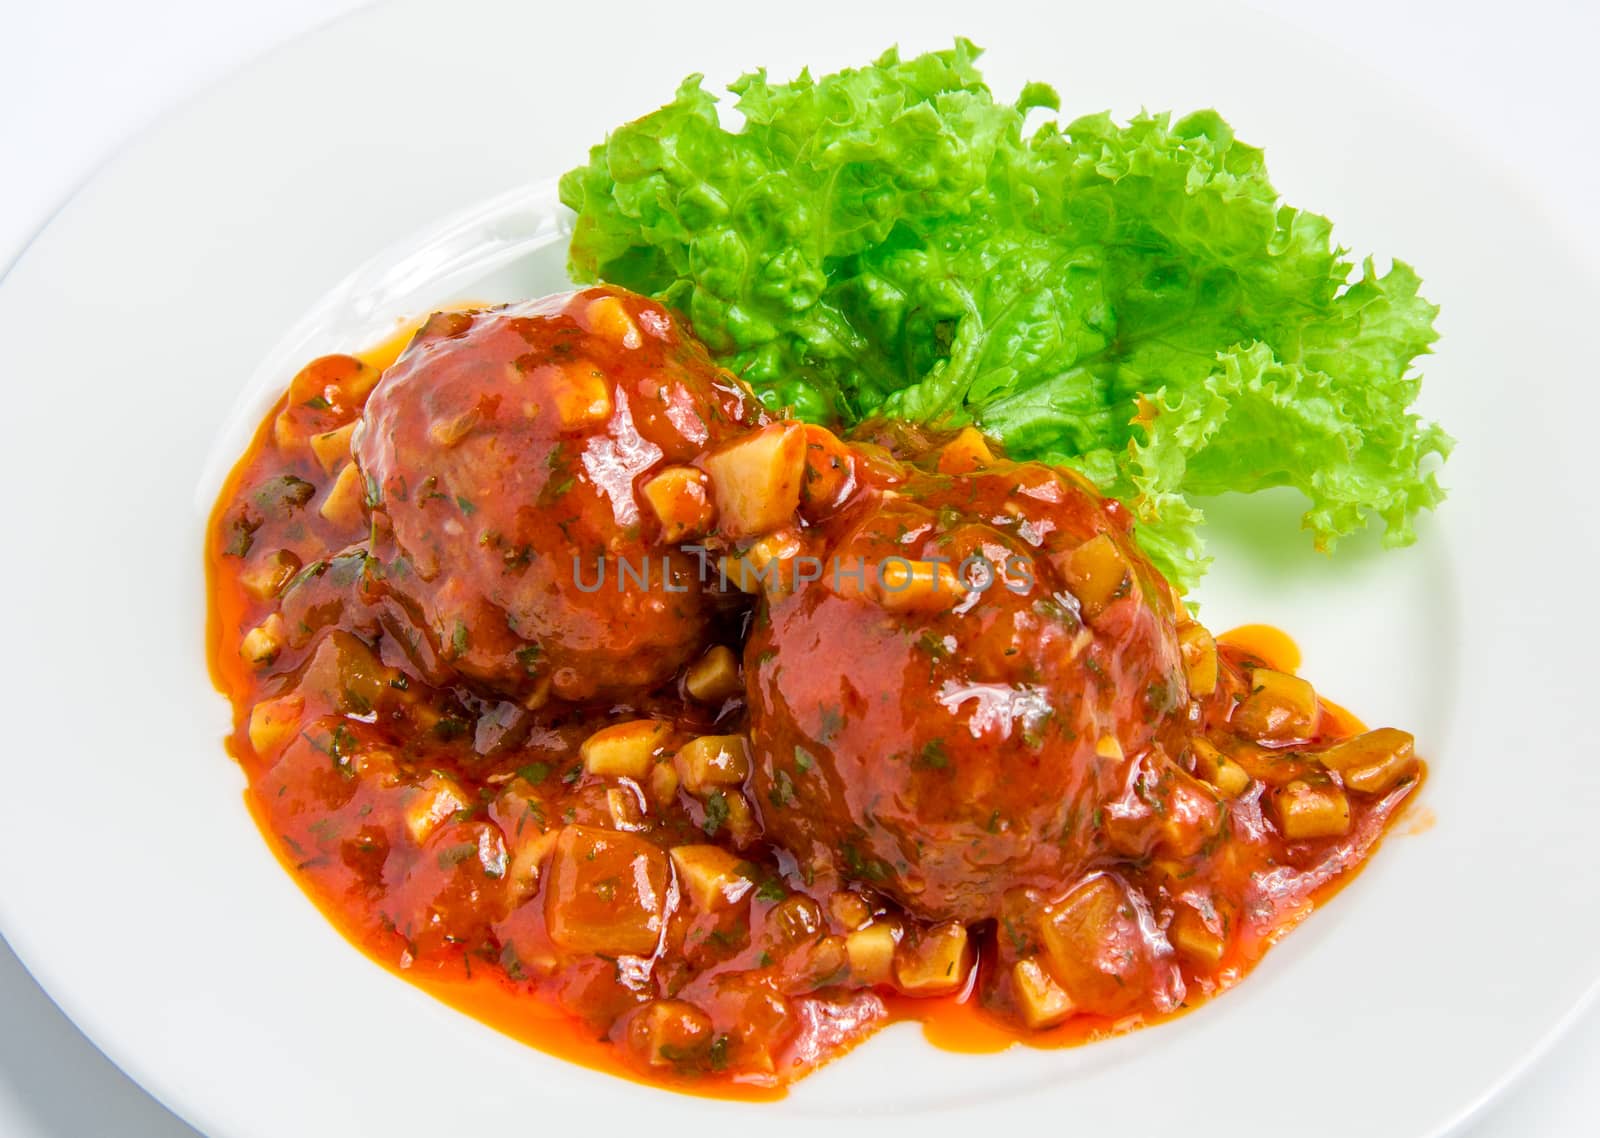 Veal meatballs with bacon in a tomato sauce with mushrooms on white plate